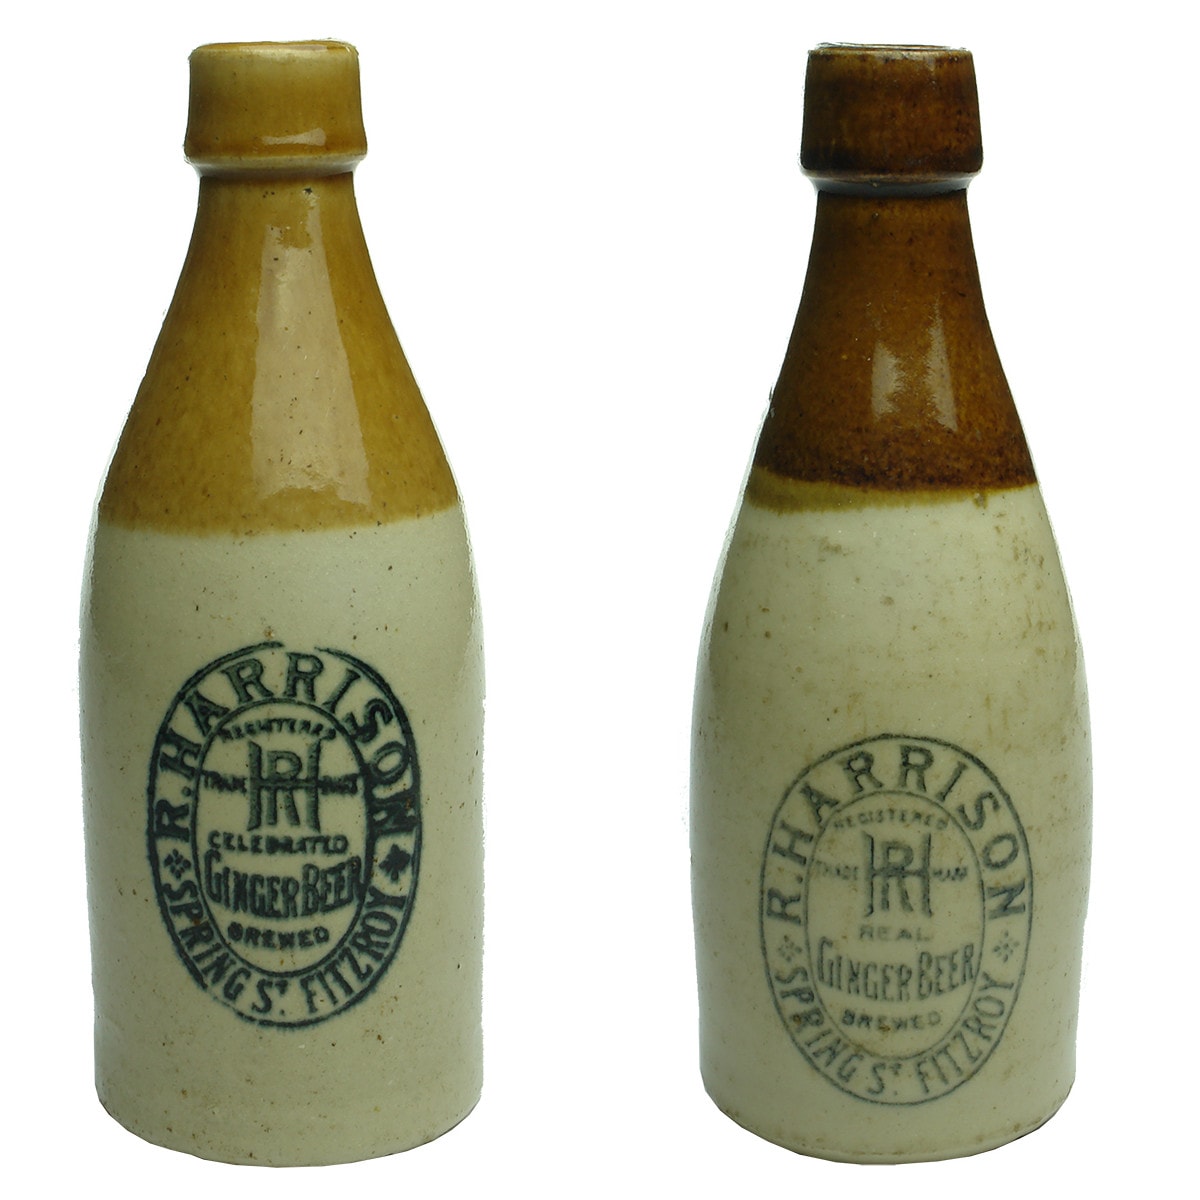 Pair of Harrison Fitzroy Ginger Beers. Celebrated and Real stamps. (Victoria)